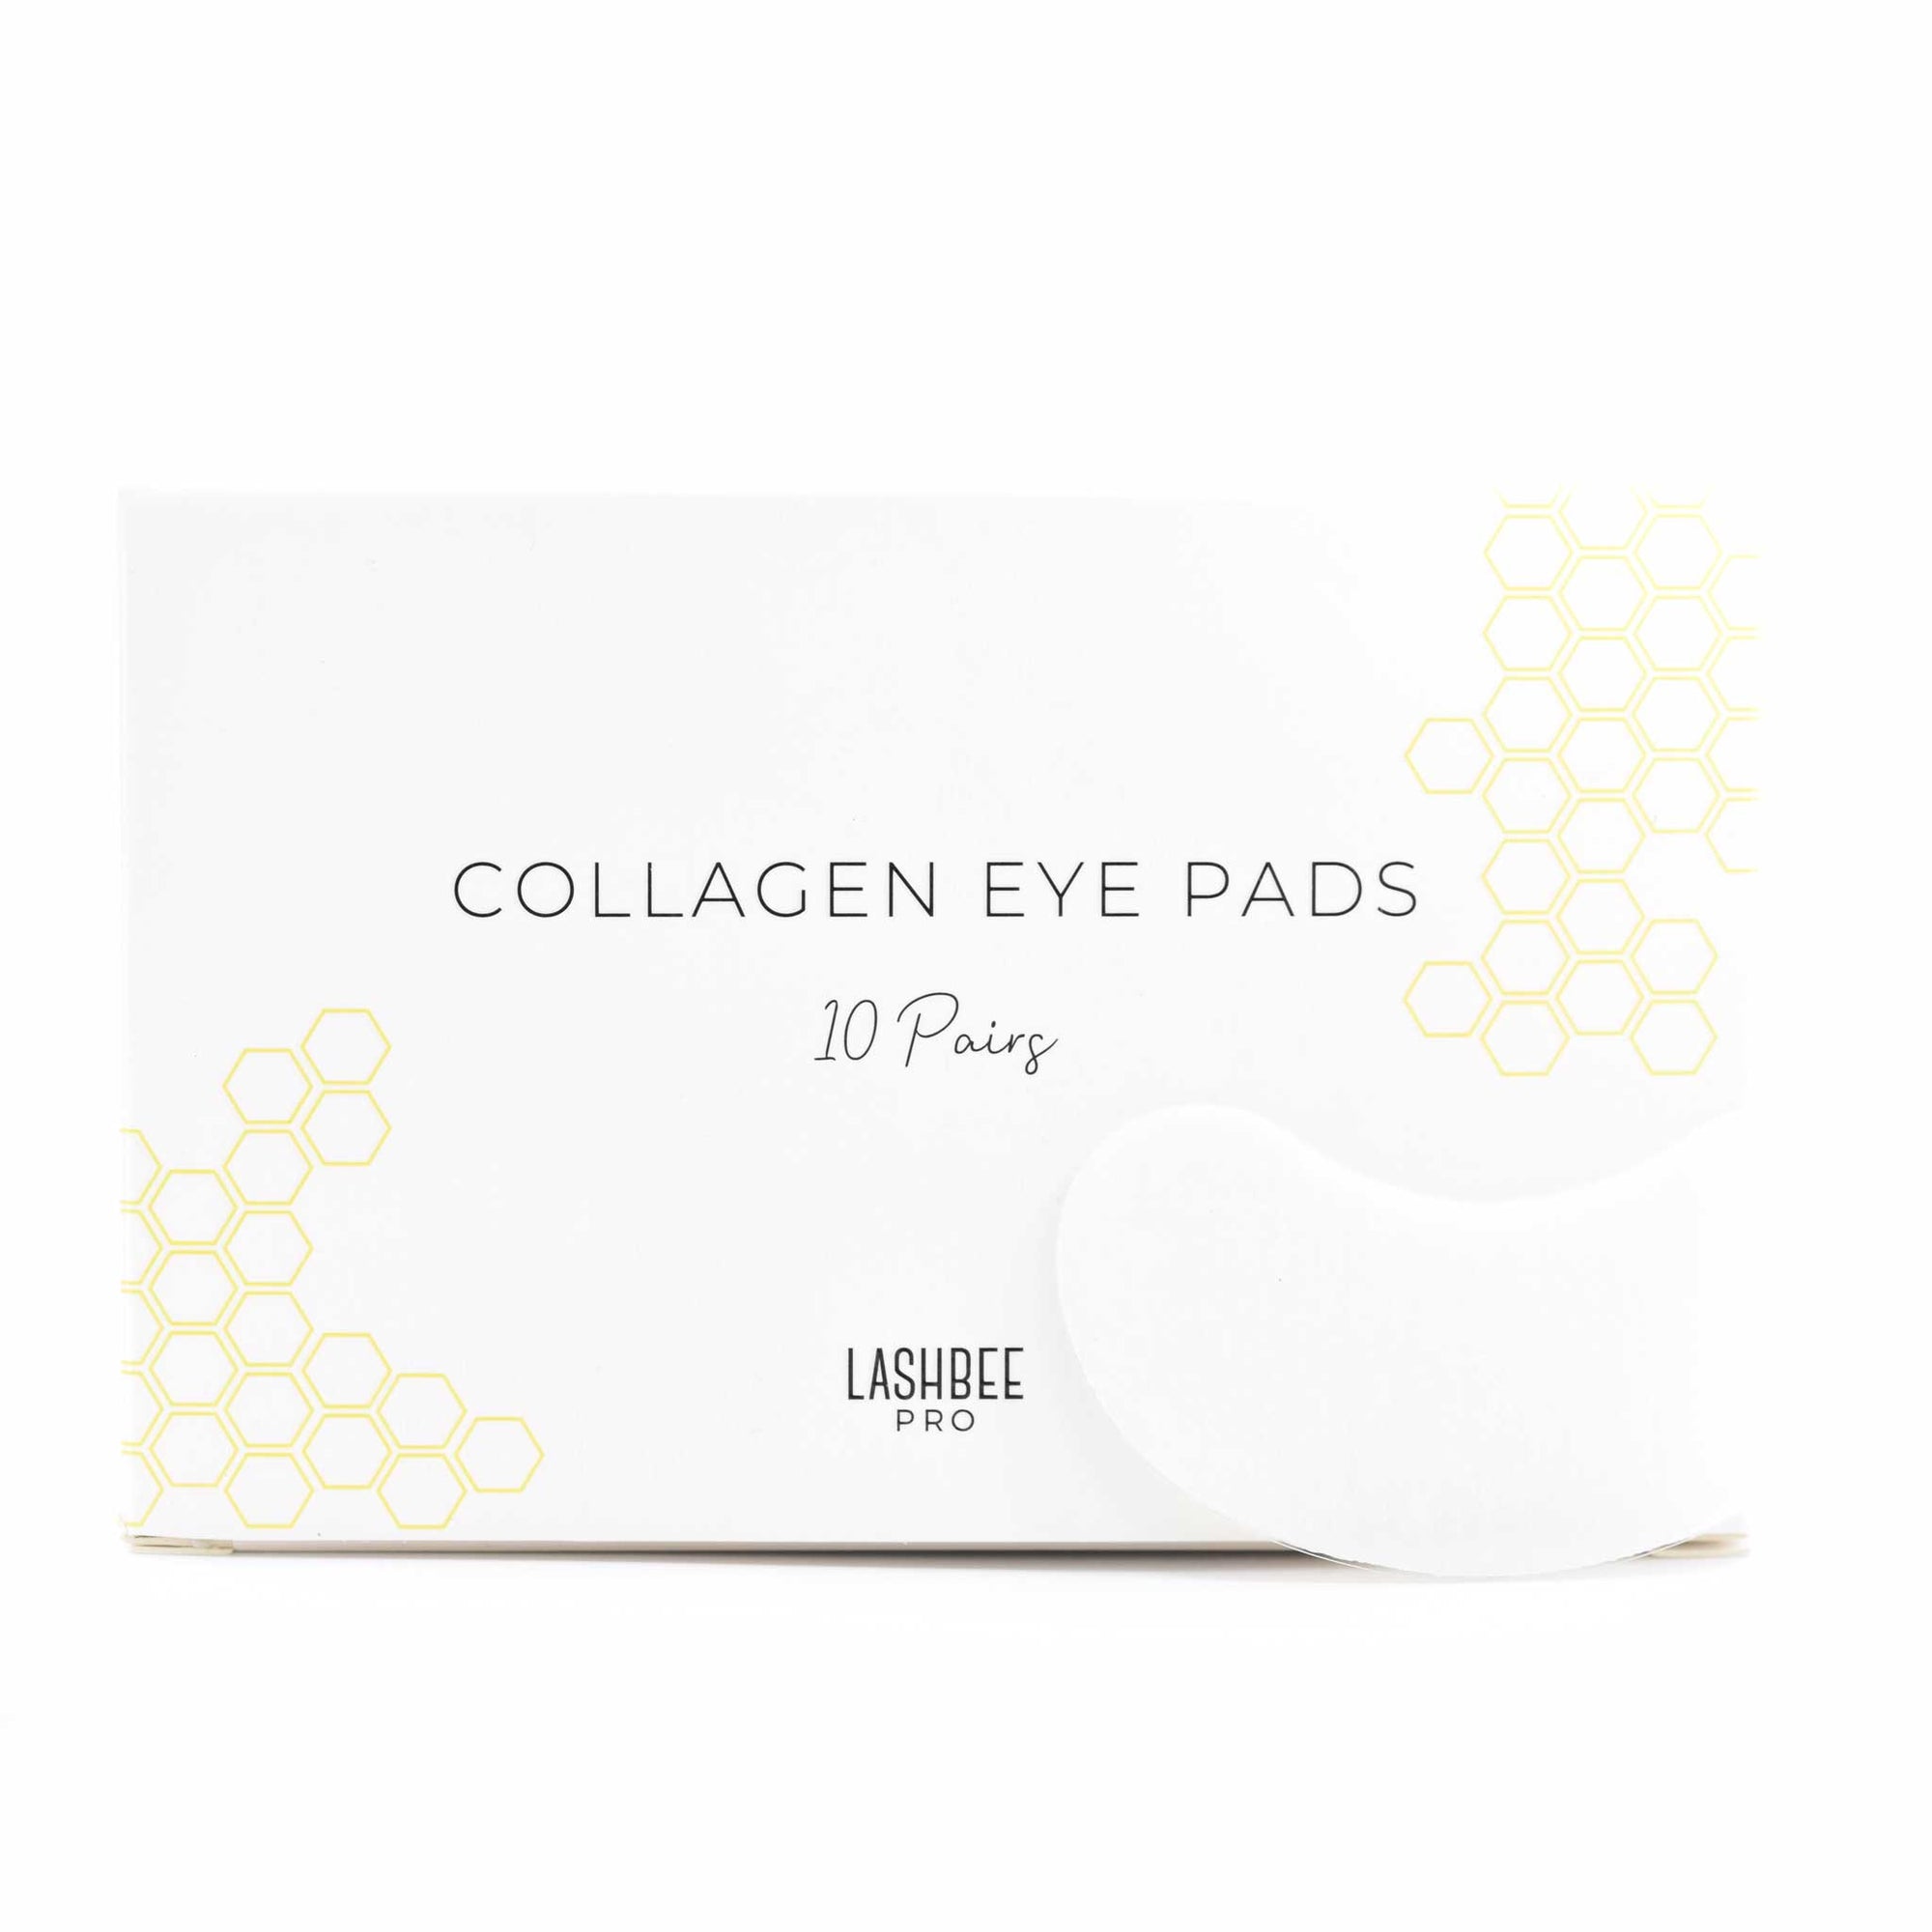 Our hydrating, collagen-infused eye pads add a bit of luxury treatment to any lash service. Perfect for any eye shape, these gentle eye pads protect your client's eyes from tweezers while simultaneously leaving their skin refreshed and brightened.  The soft gel is non-slip, staying in place even after making adjustments.